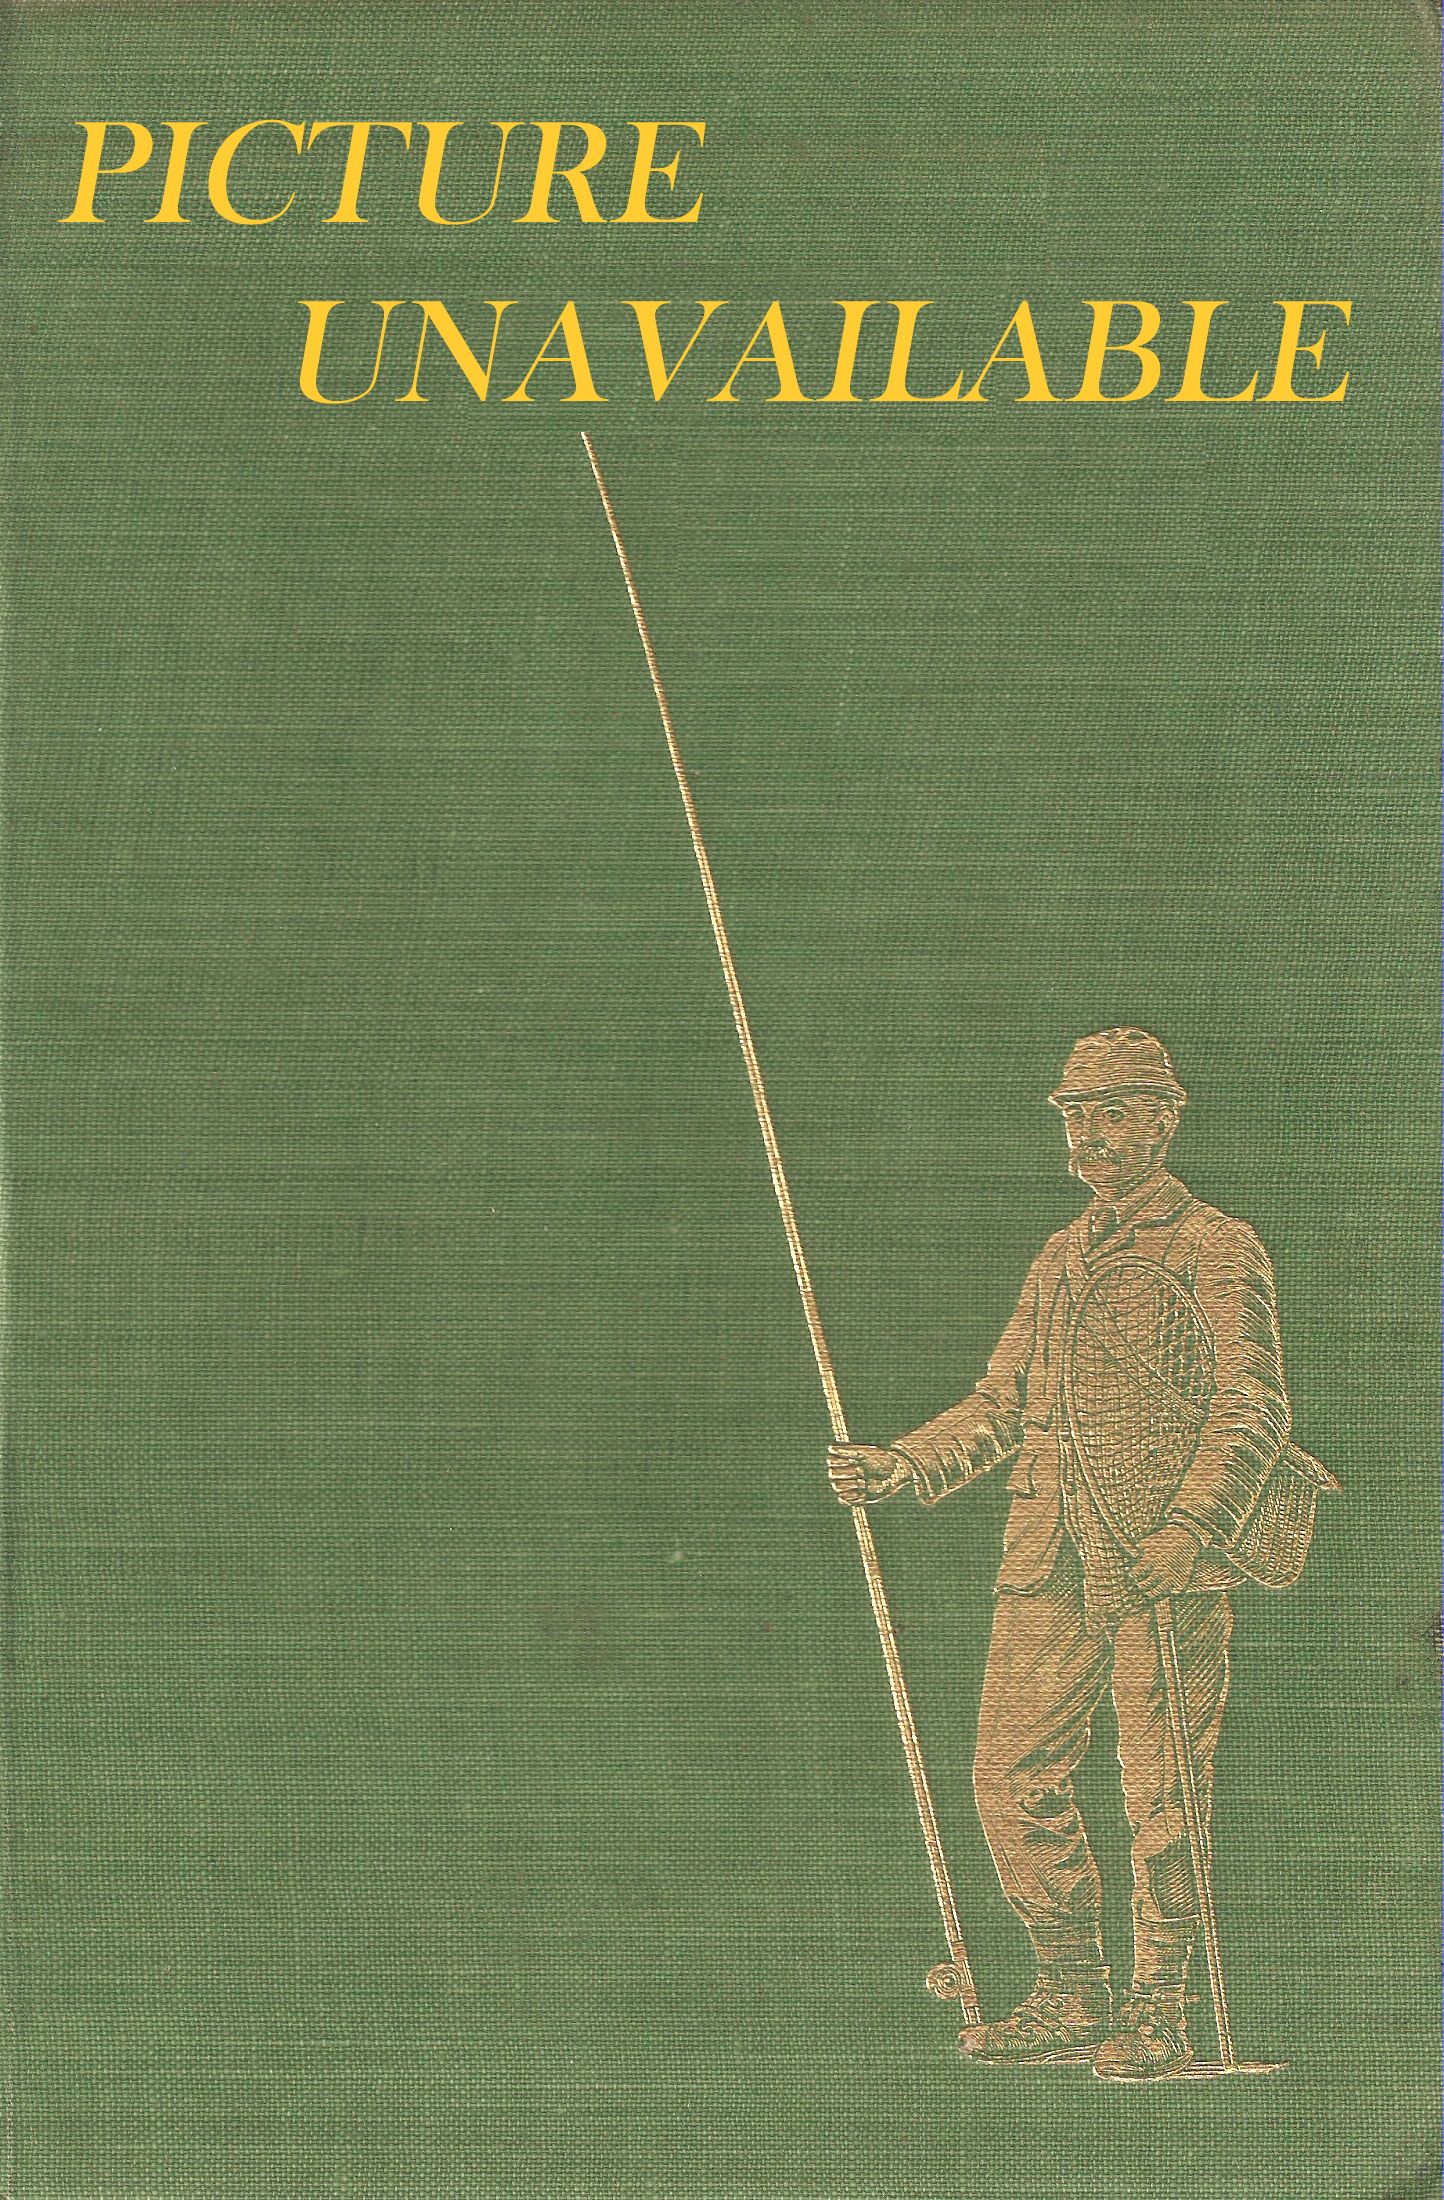 GAME AND GUN AND THE ANGLER'S MONTHLY: 1929. A JOURNAL OF BRITISH AND  OVERSEAS FIELD AND STREAM SPORT, AND BRITISH COUNTRY HOUSE INTERESTS.